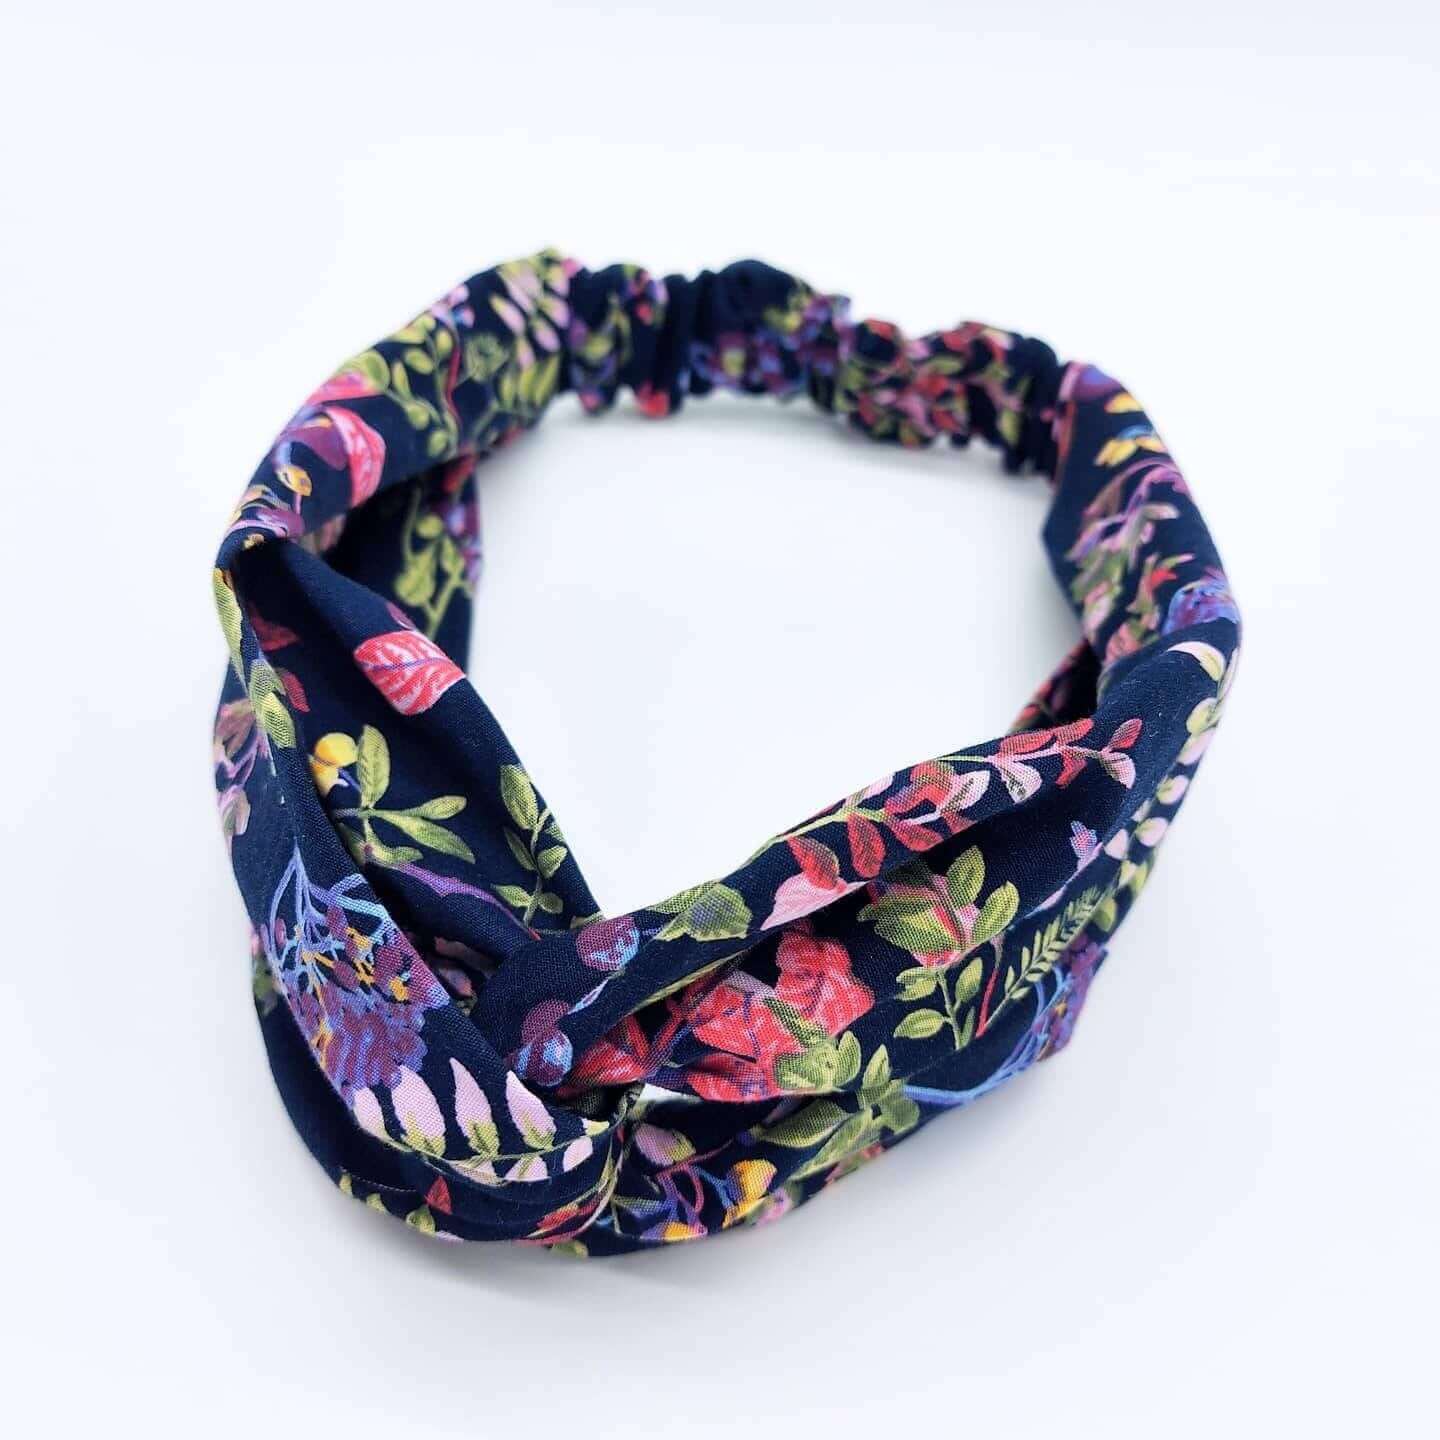 A pretty navy blue cotton, floral print turban twist headband with an elasticated panel at the back.